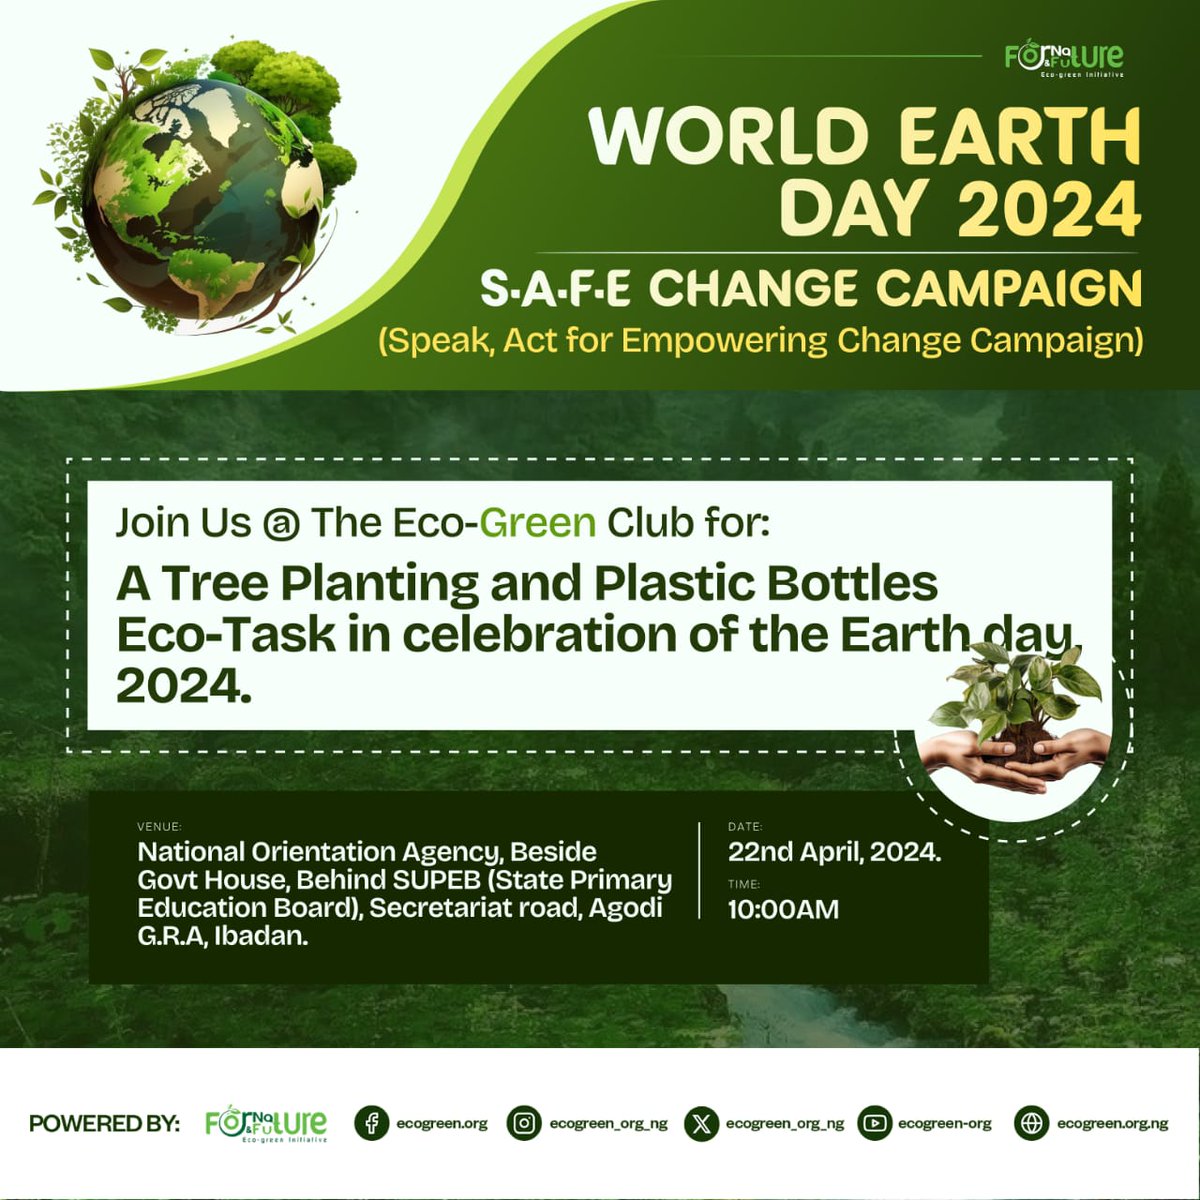 I am so excited about the kick-off of The S.A.F.E CHANGE CAMPAIGN on this year's Earth Day. It's a commemorative event, but a big step in our commitment to raise a billion voices and actors for achieving a greener, safer & more sustainable planet. #TheFutureIshere
#EarthDay2024